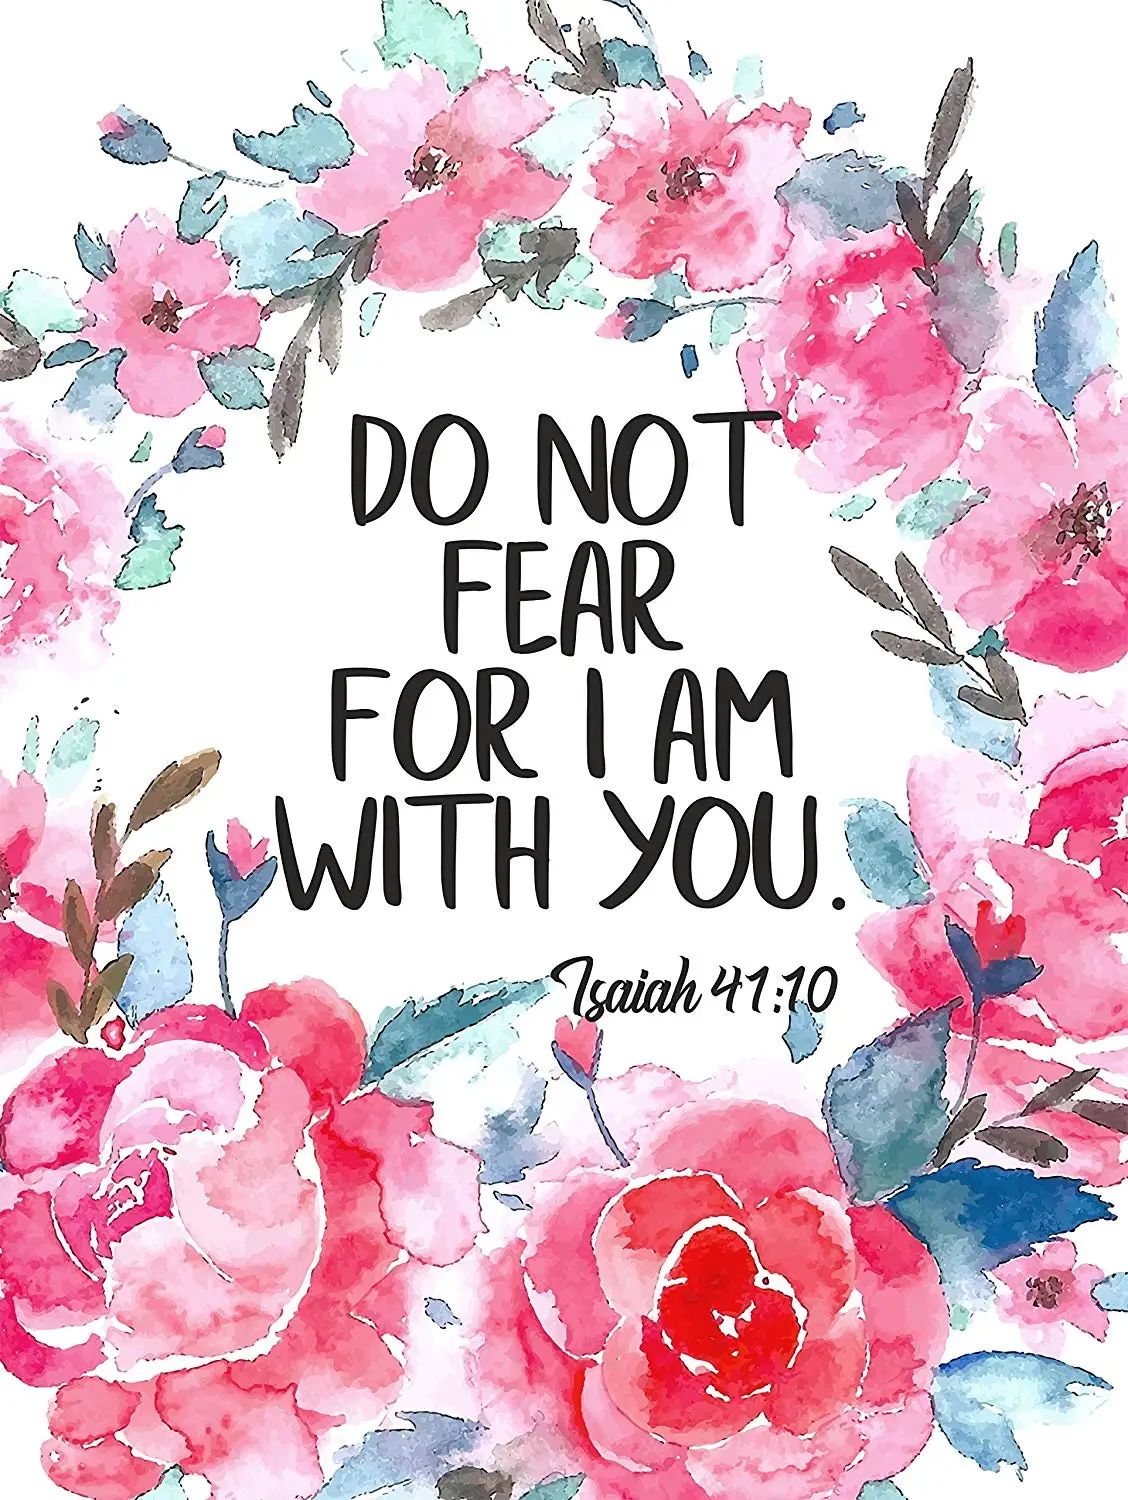 fear not for am with you